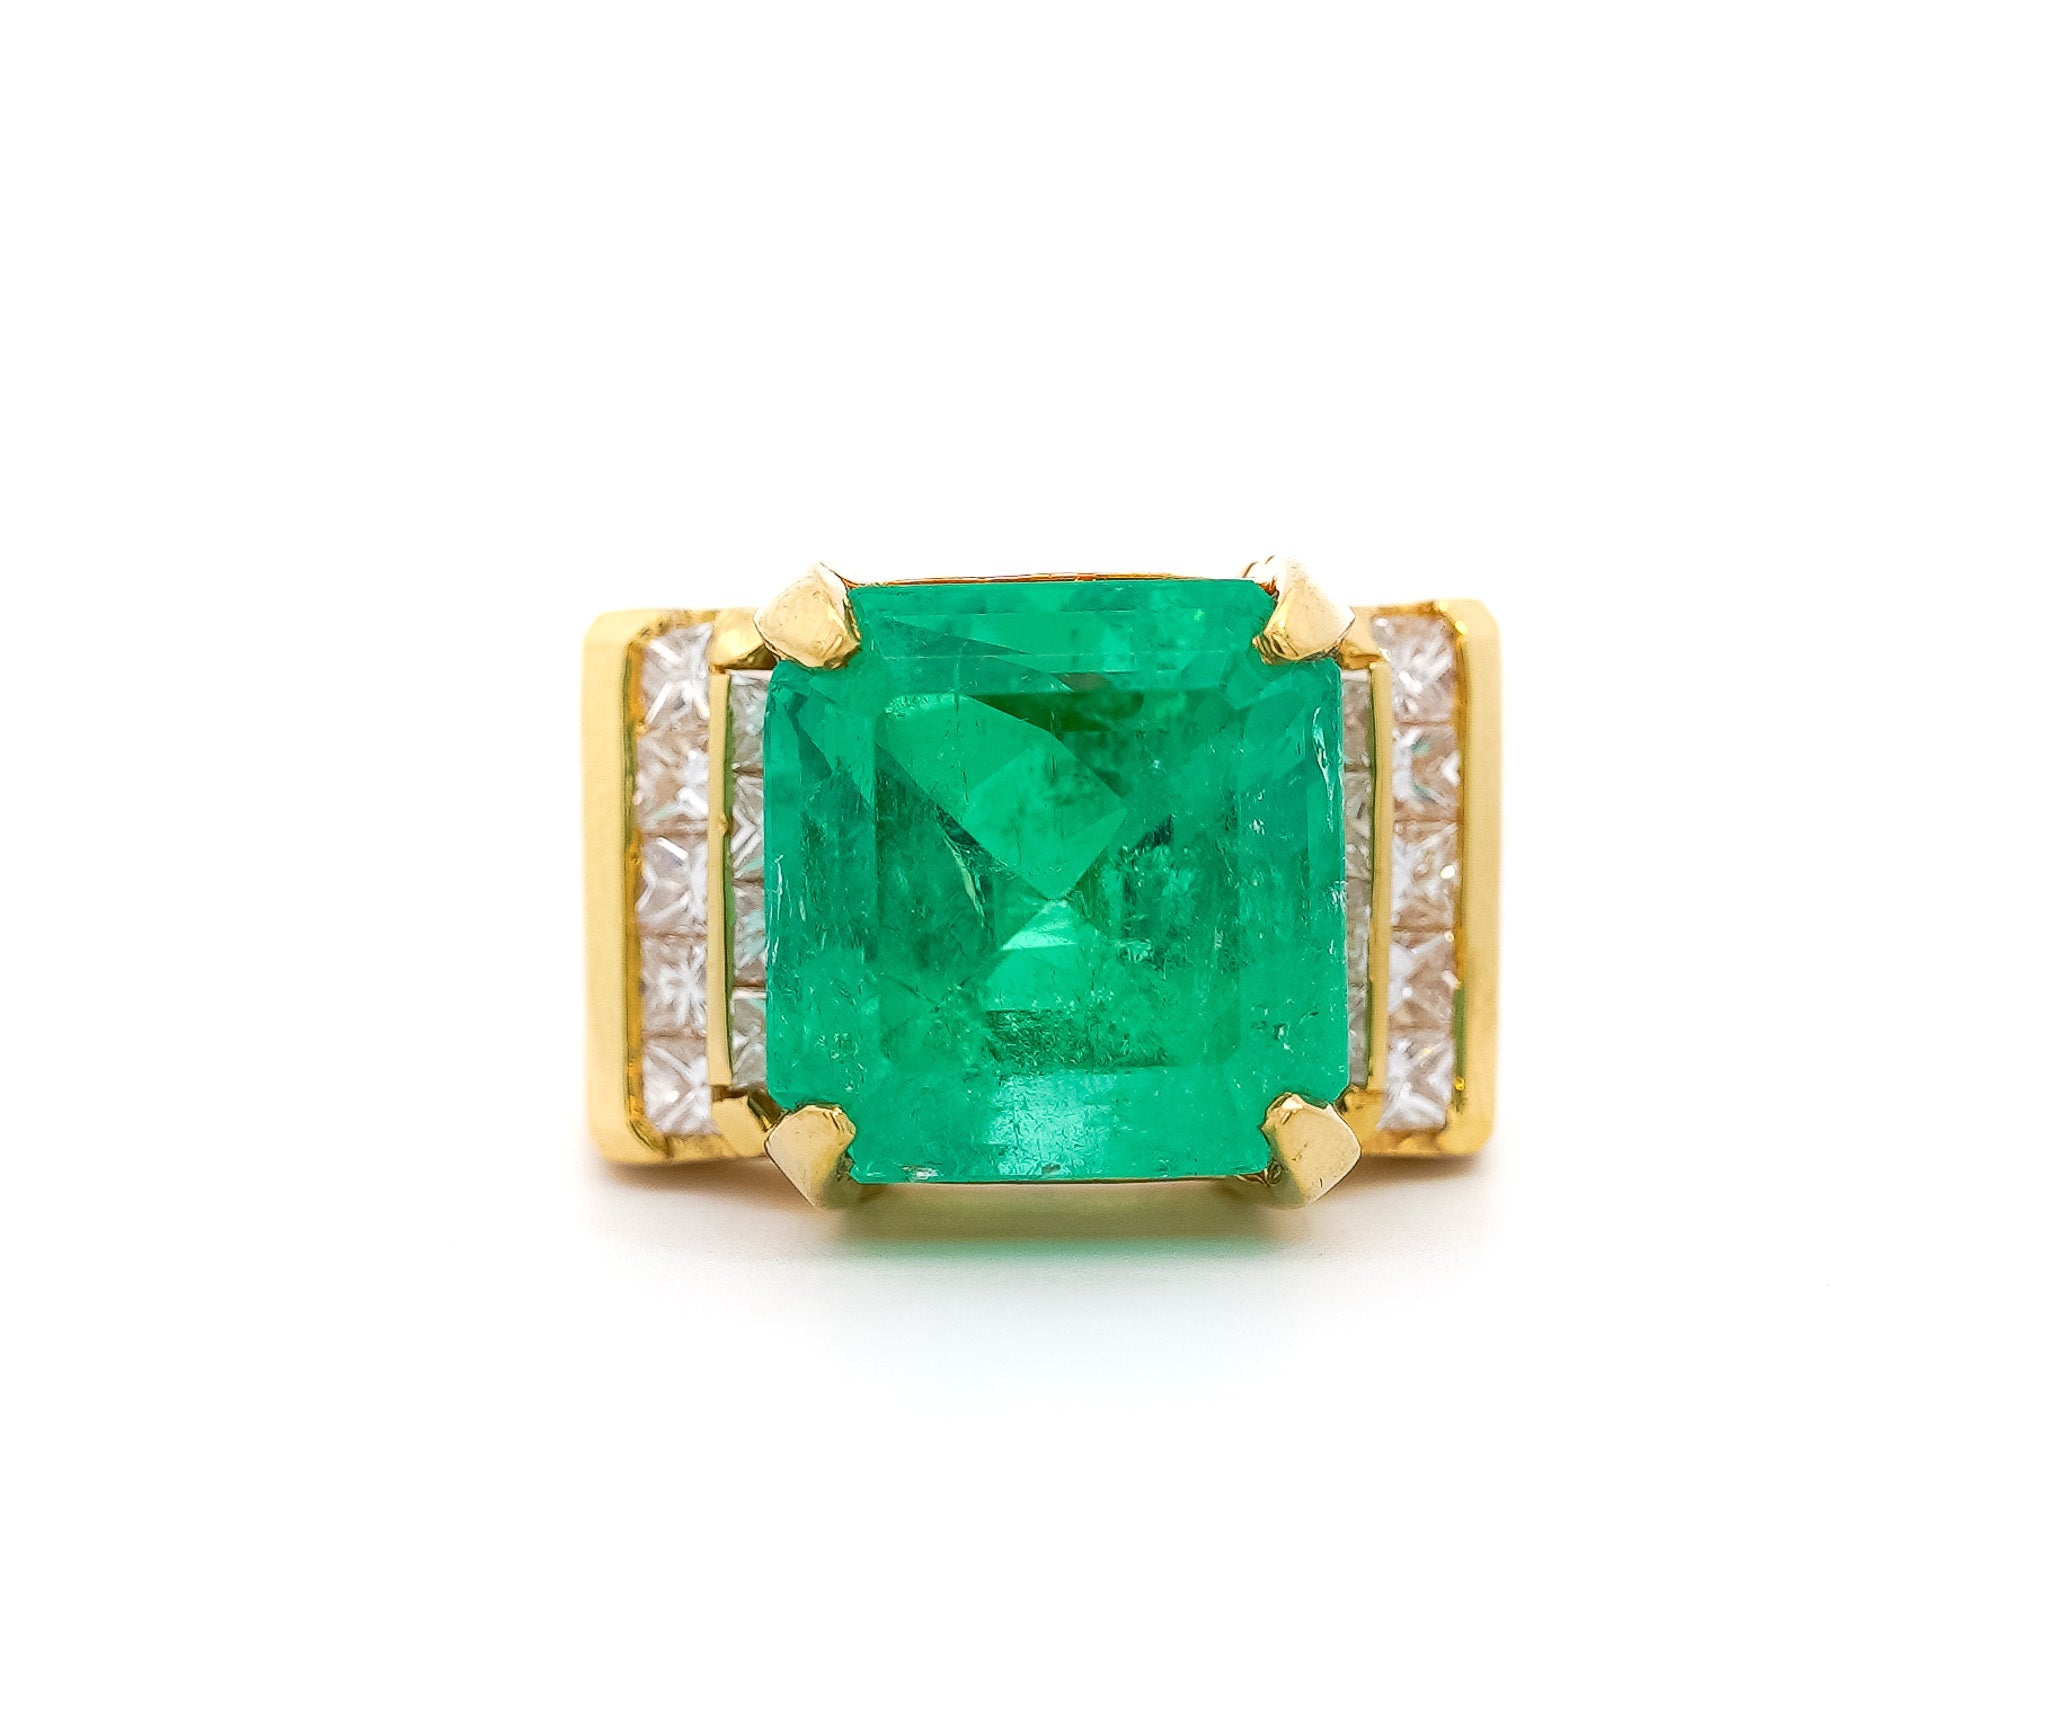 GIA-Certified-13-Carat-Colombian-Emerald-Mens-Ring-in-18K-Gold-With-Princess-Cut-Diamonds-Rings.jpg